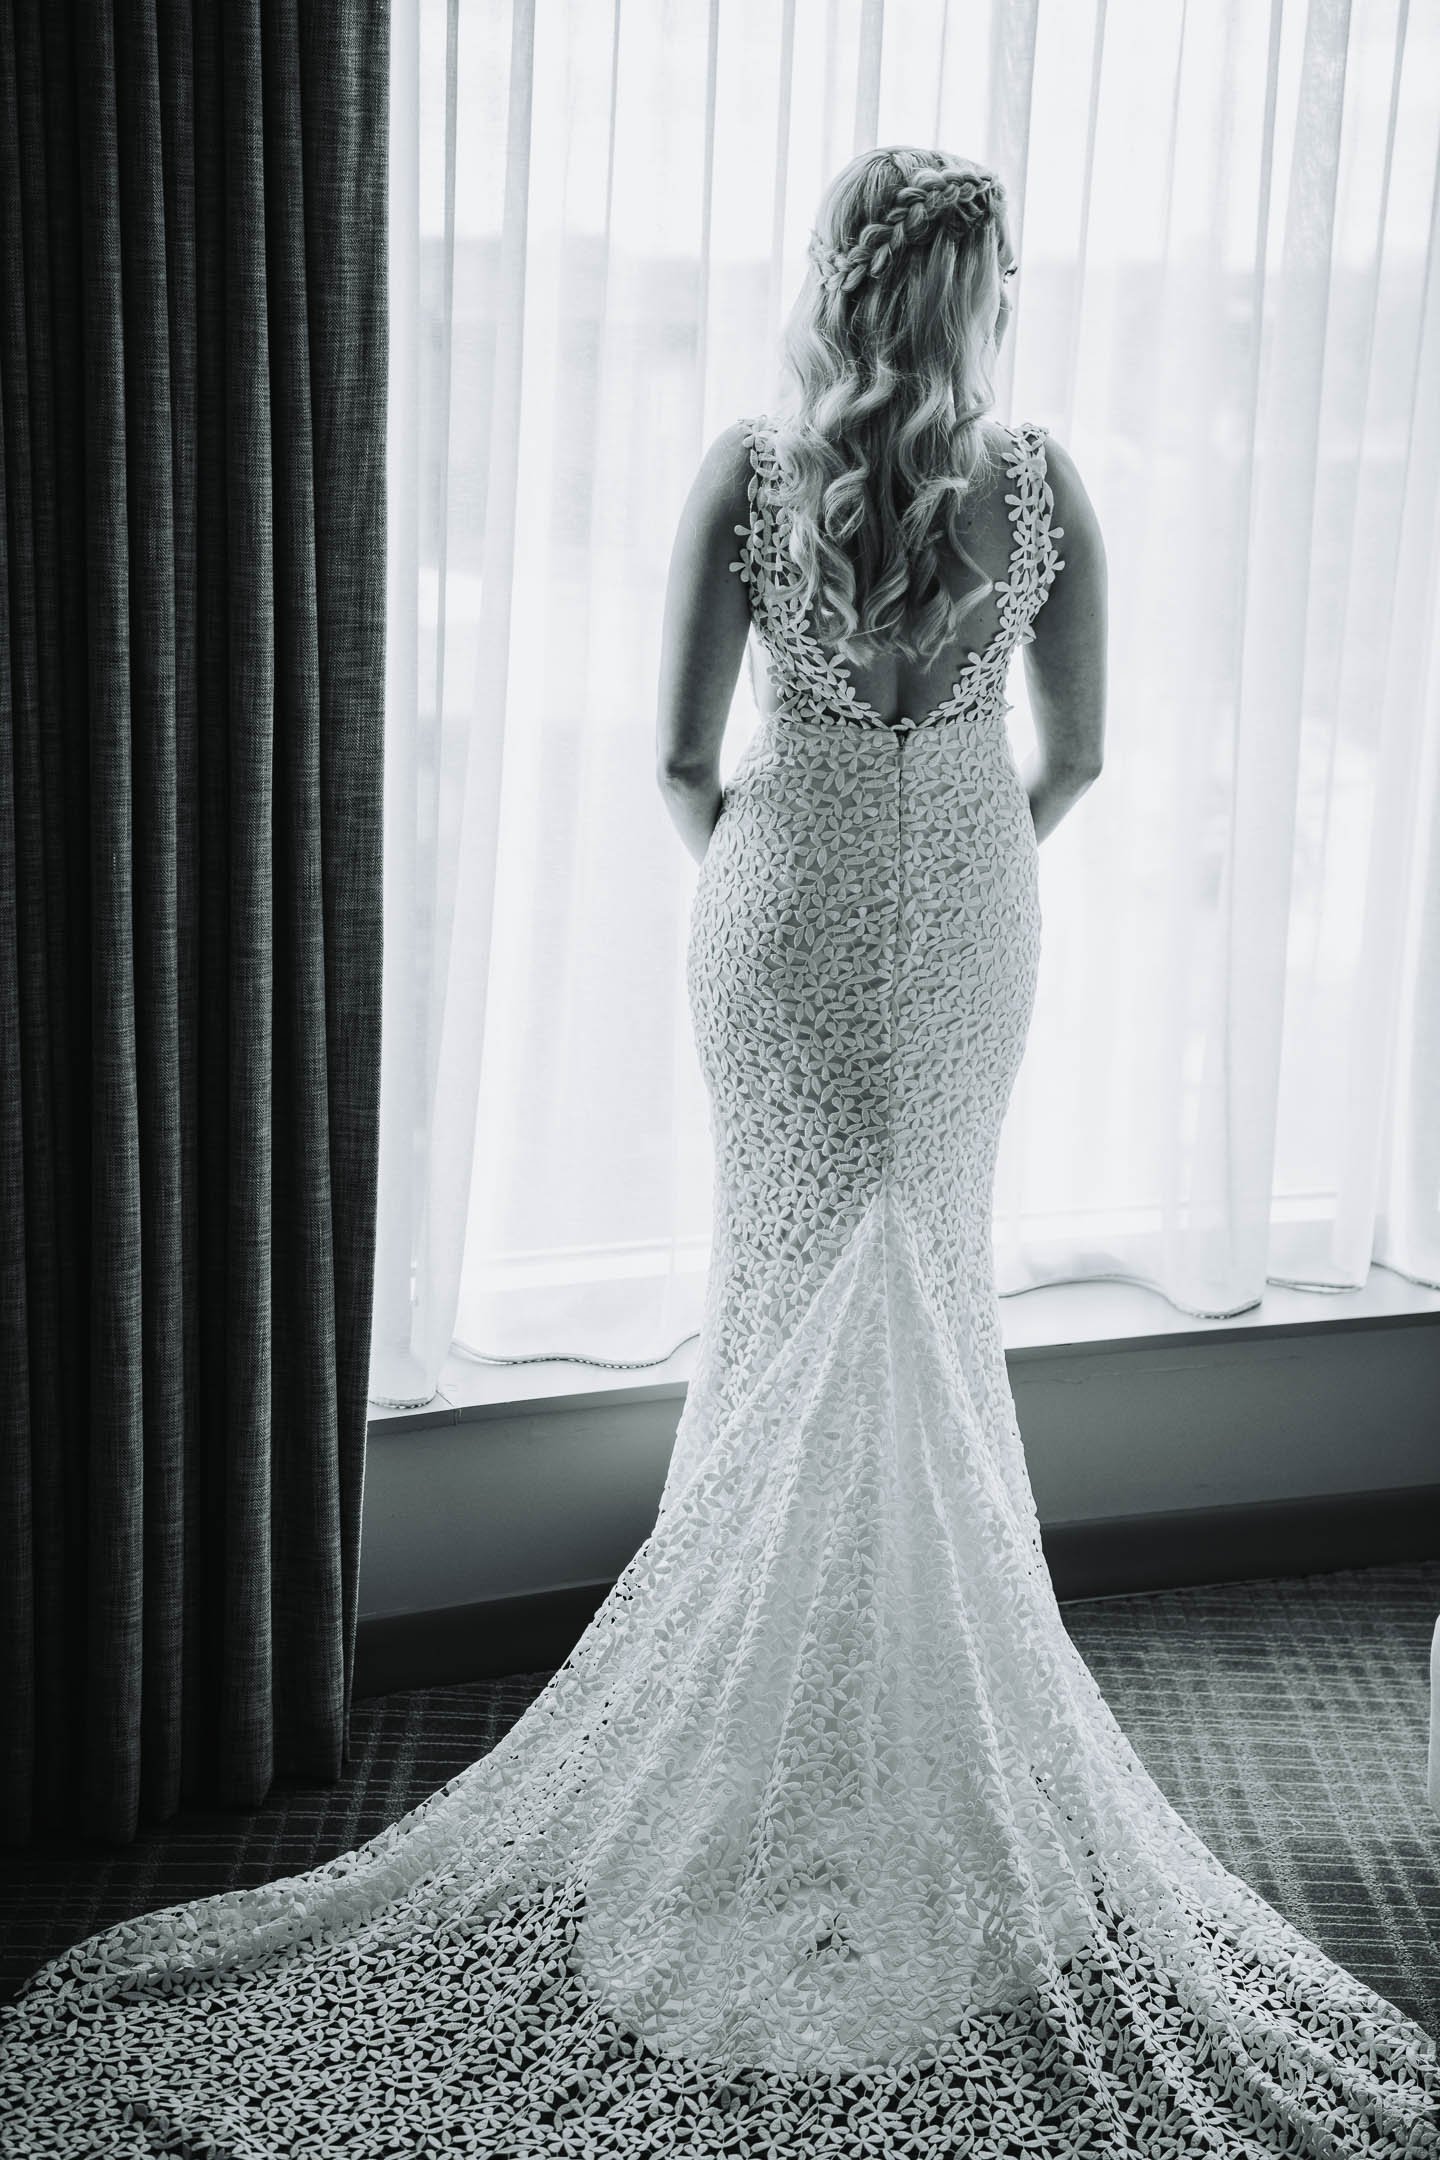 Top Wedding Photographers Near Me | Ravenswood Event Center | J. Brown Photography | creative portrait of bride at Hotel Zachary wedding suite